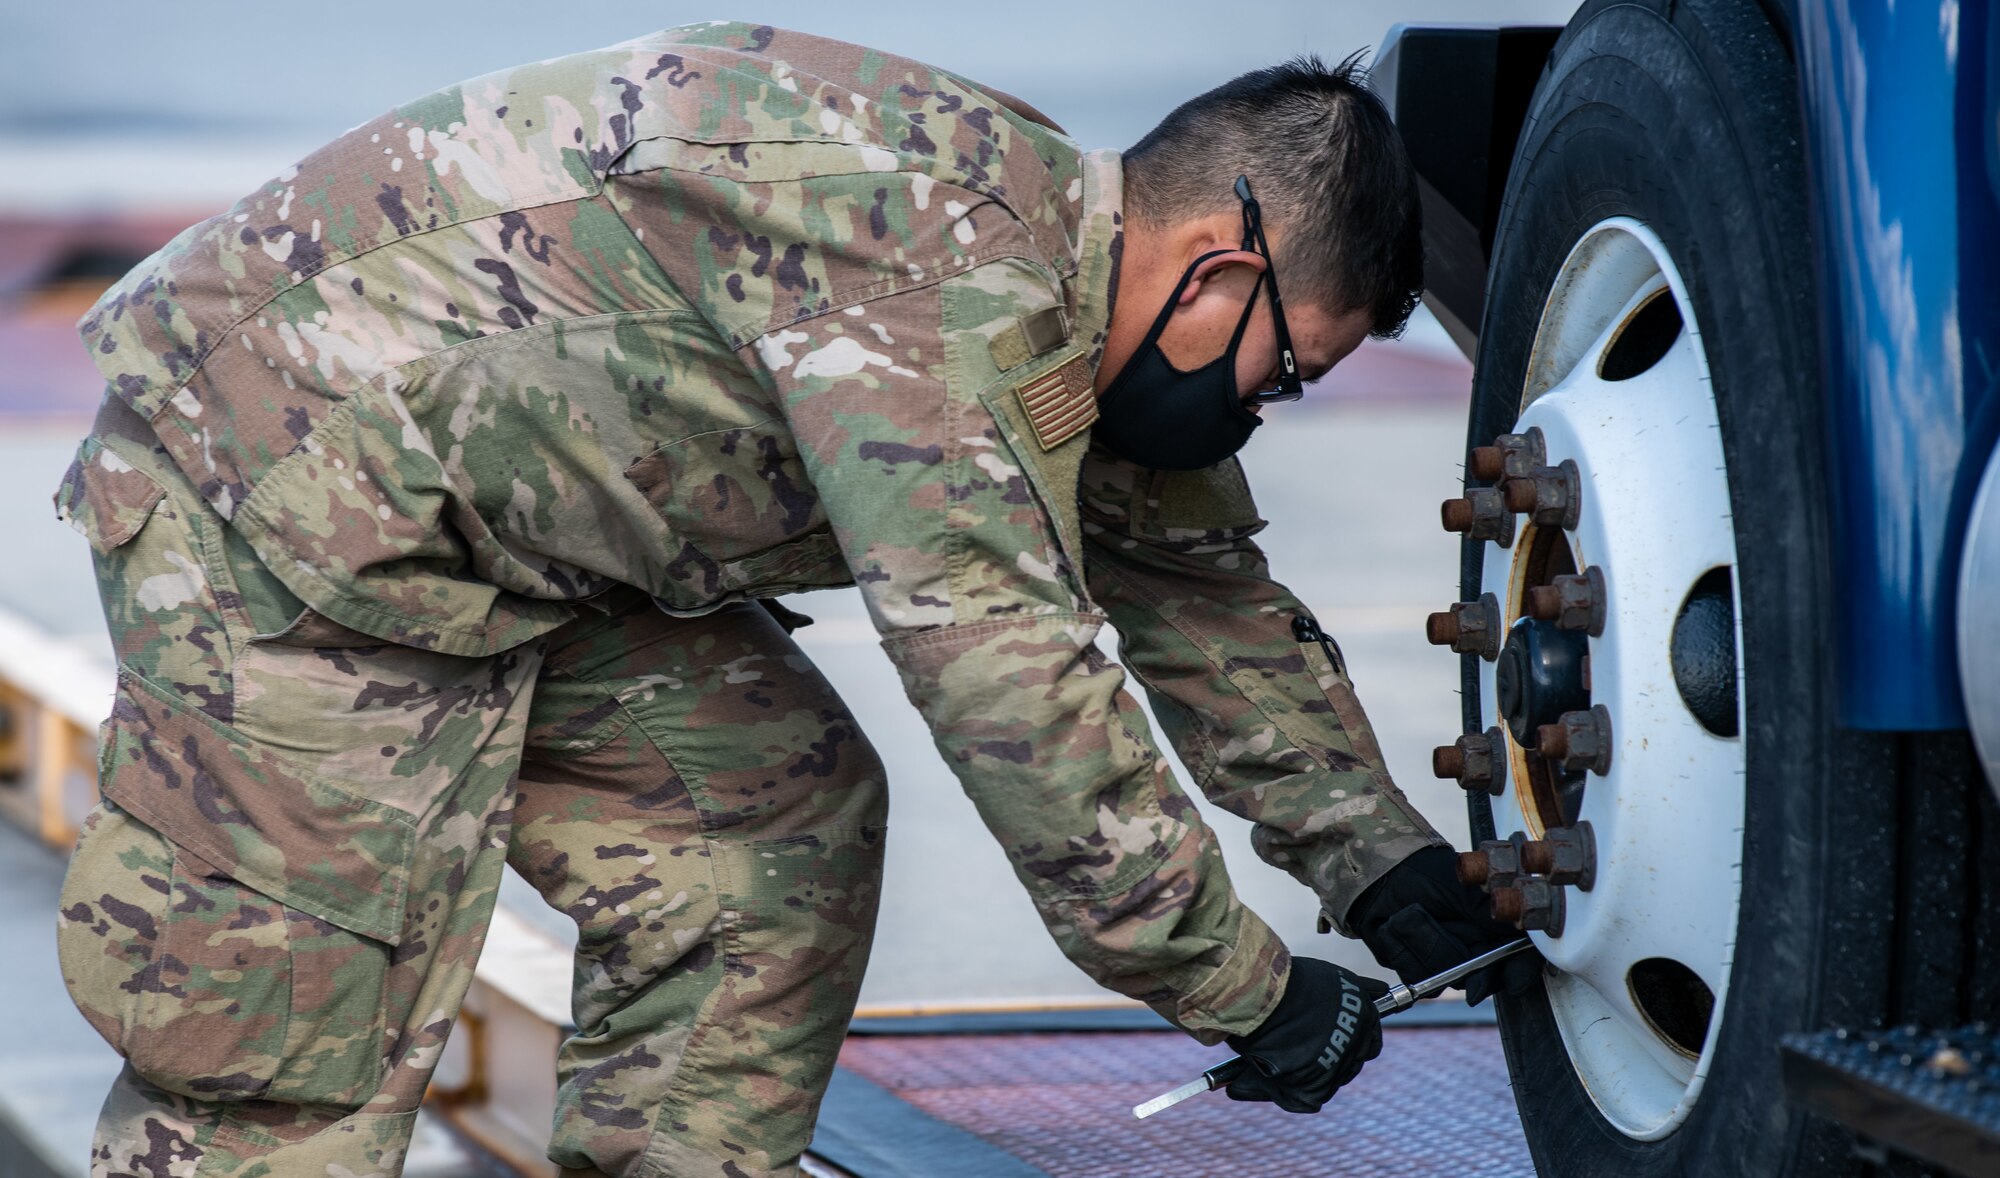 Tech. Sgt. Jimmy Tran, 56th Aerial Port Squadron air transportation specialist, checks the tire pressure of a Delaware Army National Guard truck during joint training at Dover Air Force Base, Delaware, March 29, 2021. The training focused on providing rapid global airlift through the integration of U.S. Air Force Airmen and Delaware National Guard Soldiers. (U.S. Air Force photo by Senior Airman Christopher Quail)